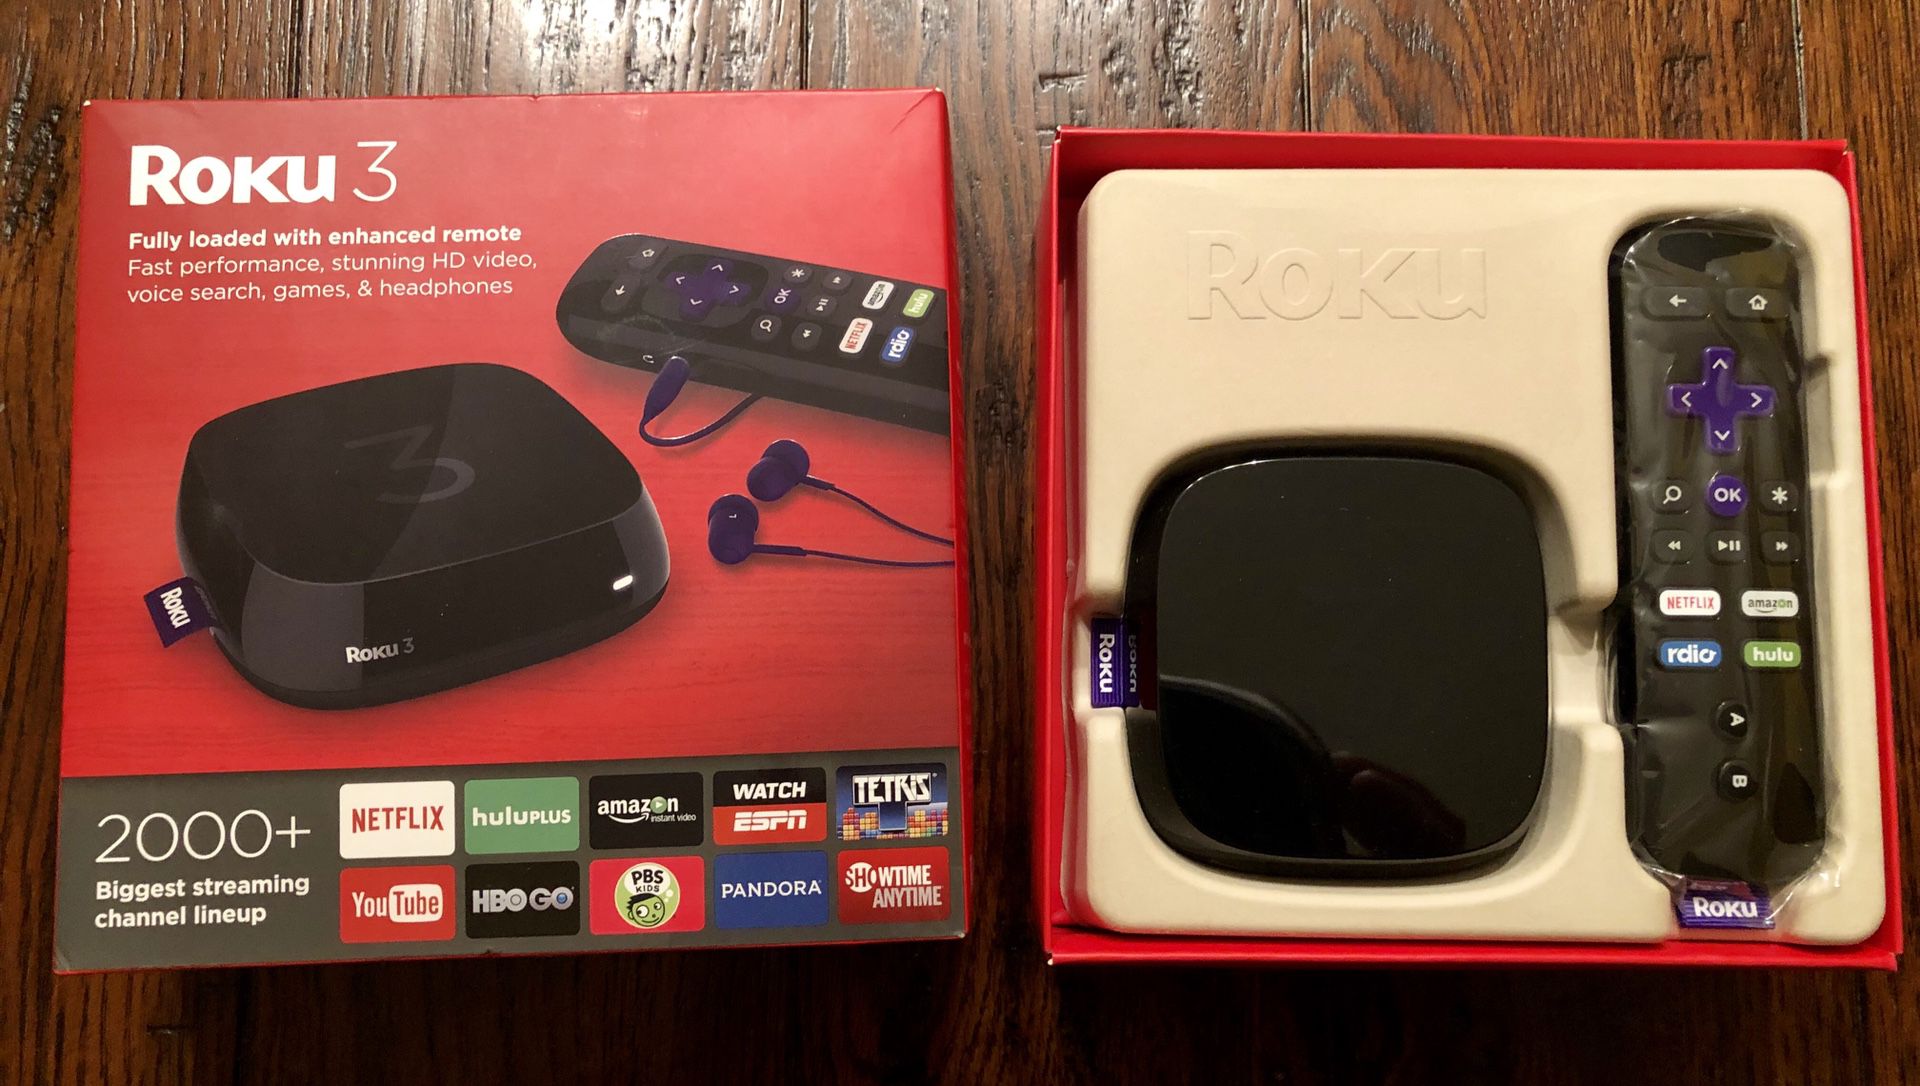 Roku 3 with voice search (model #4230R - 2015 model)